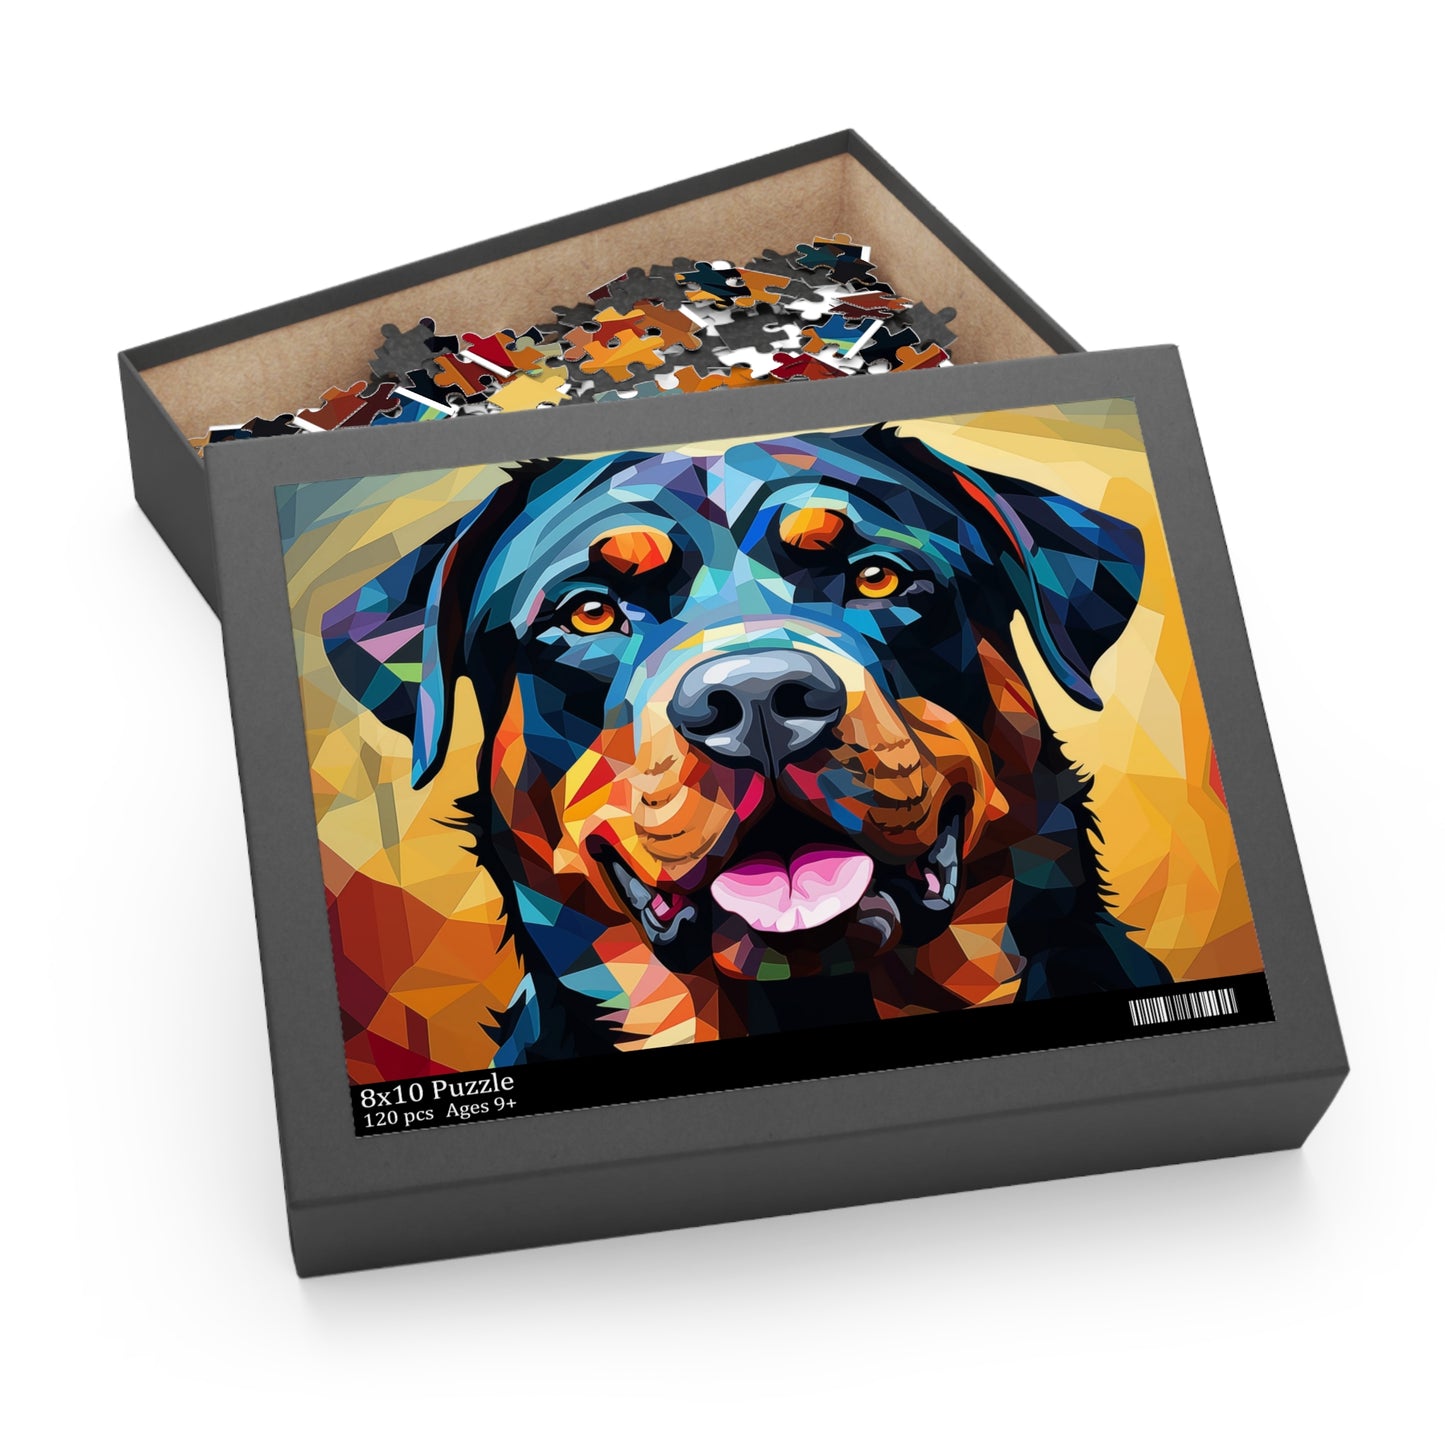 Rottweiler Vibrant Abstract Dog Jigsaw Puzzle Oil Paint Adult Birthday Business Jigsaw Puzzle Gift for Him Funny Humorous Indoor Outdoor Game Gift For Her Online-6